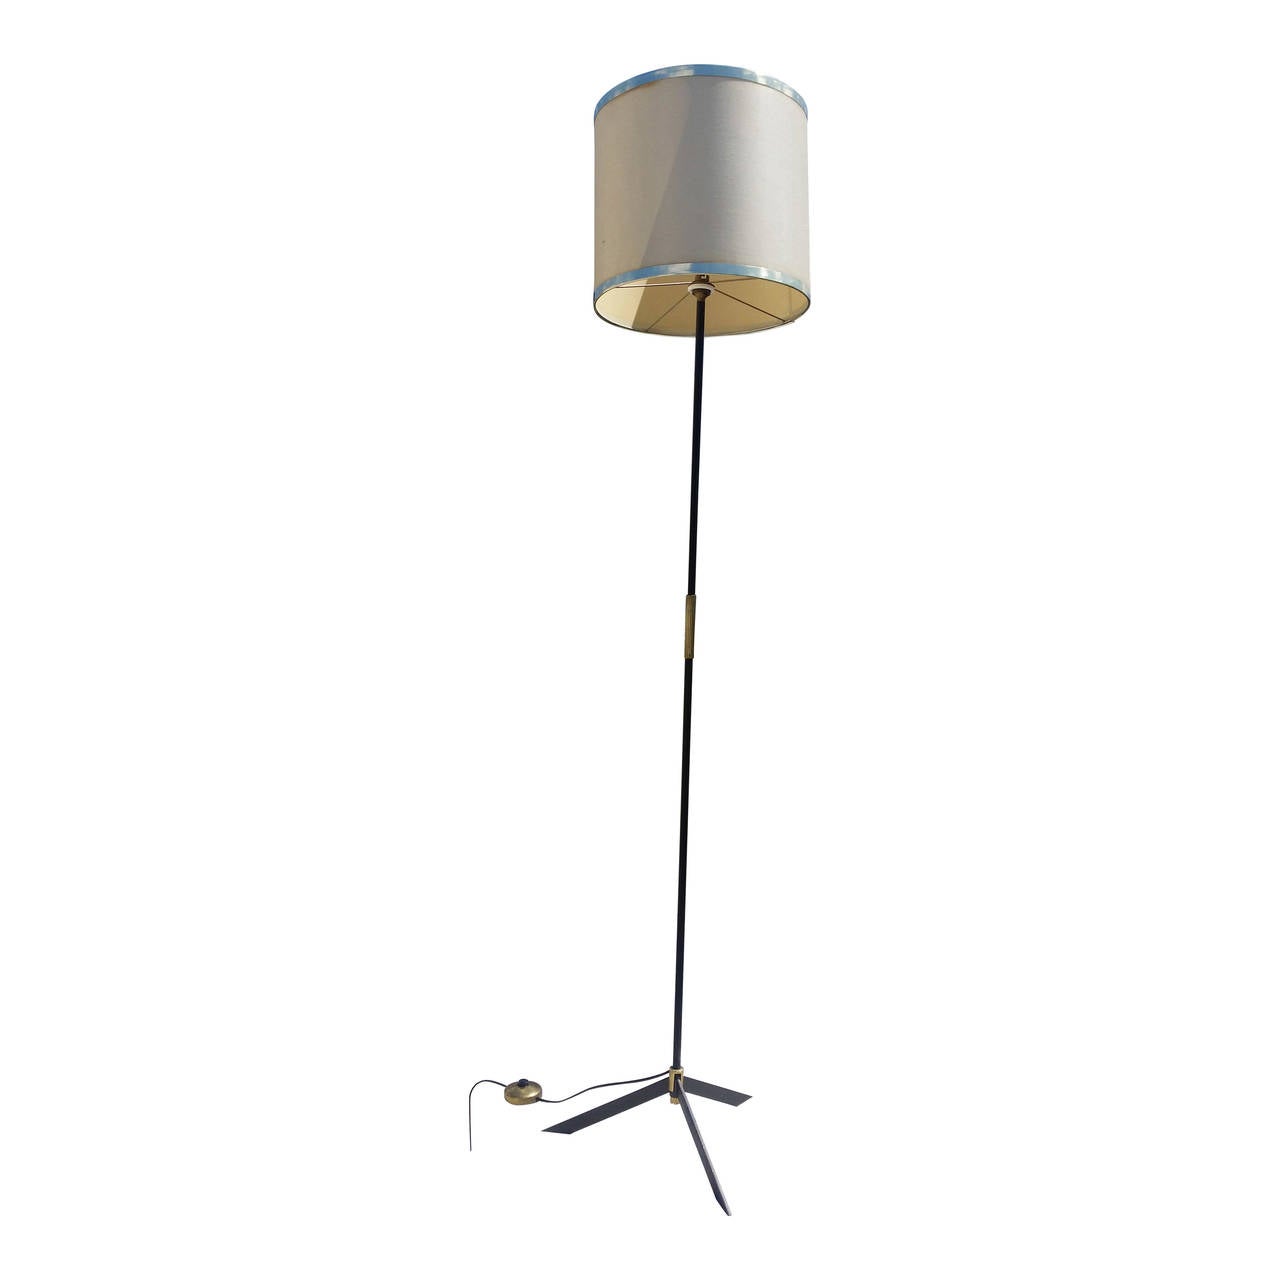 enameled steel tripod lamp floor in the style of Maison Arlus , France 1960's
brass details
European socket and wiring
 Item ships from France. Price does not include shipping, handling, customs duties or the cost of customs clearance